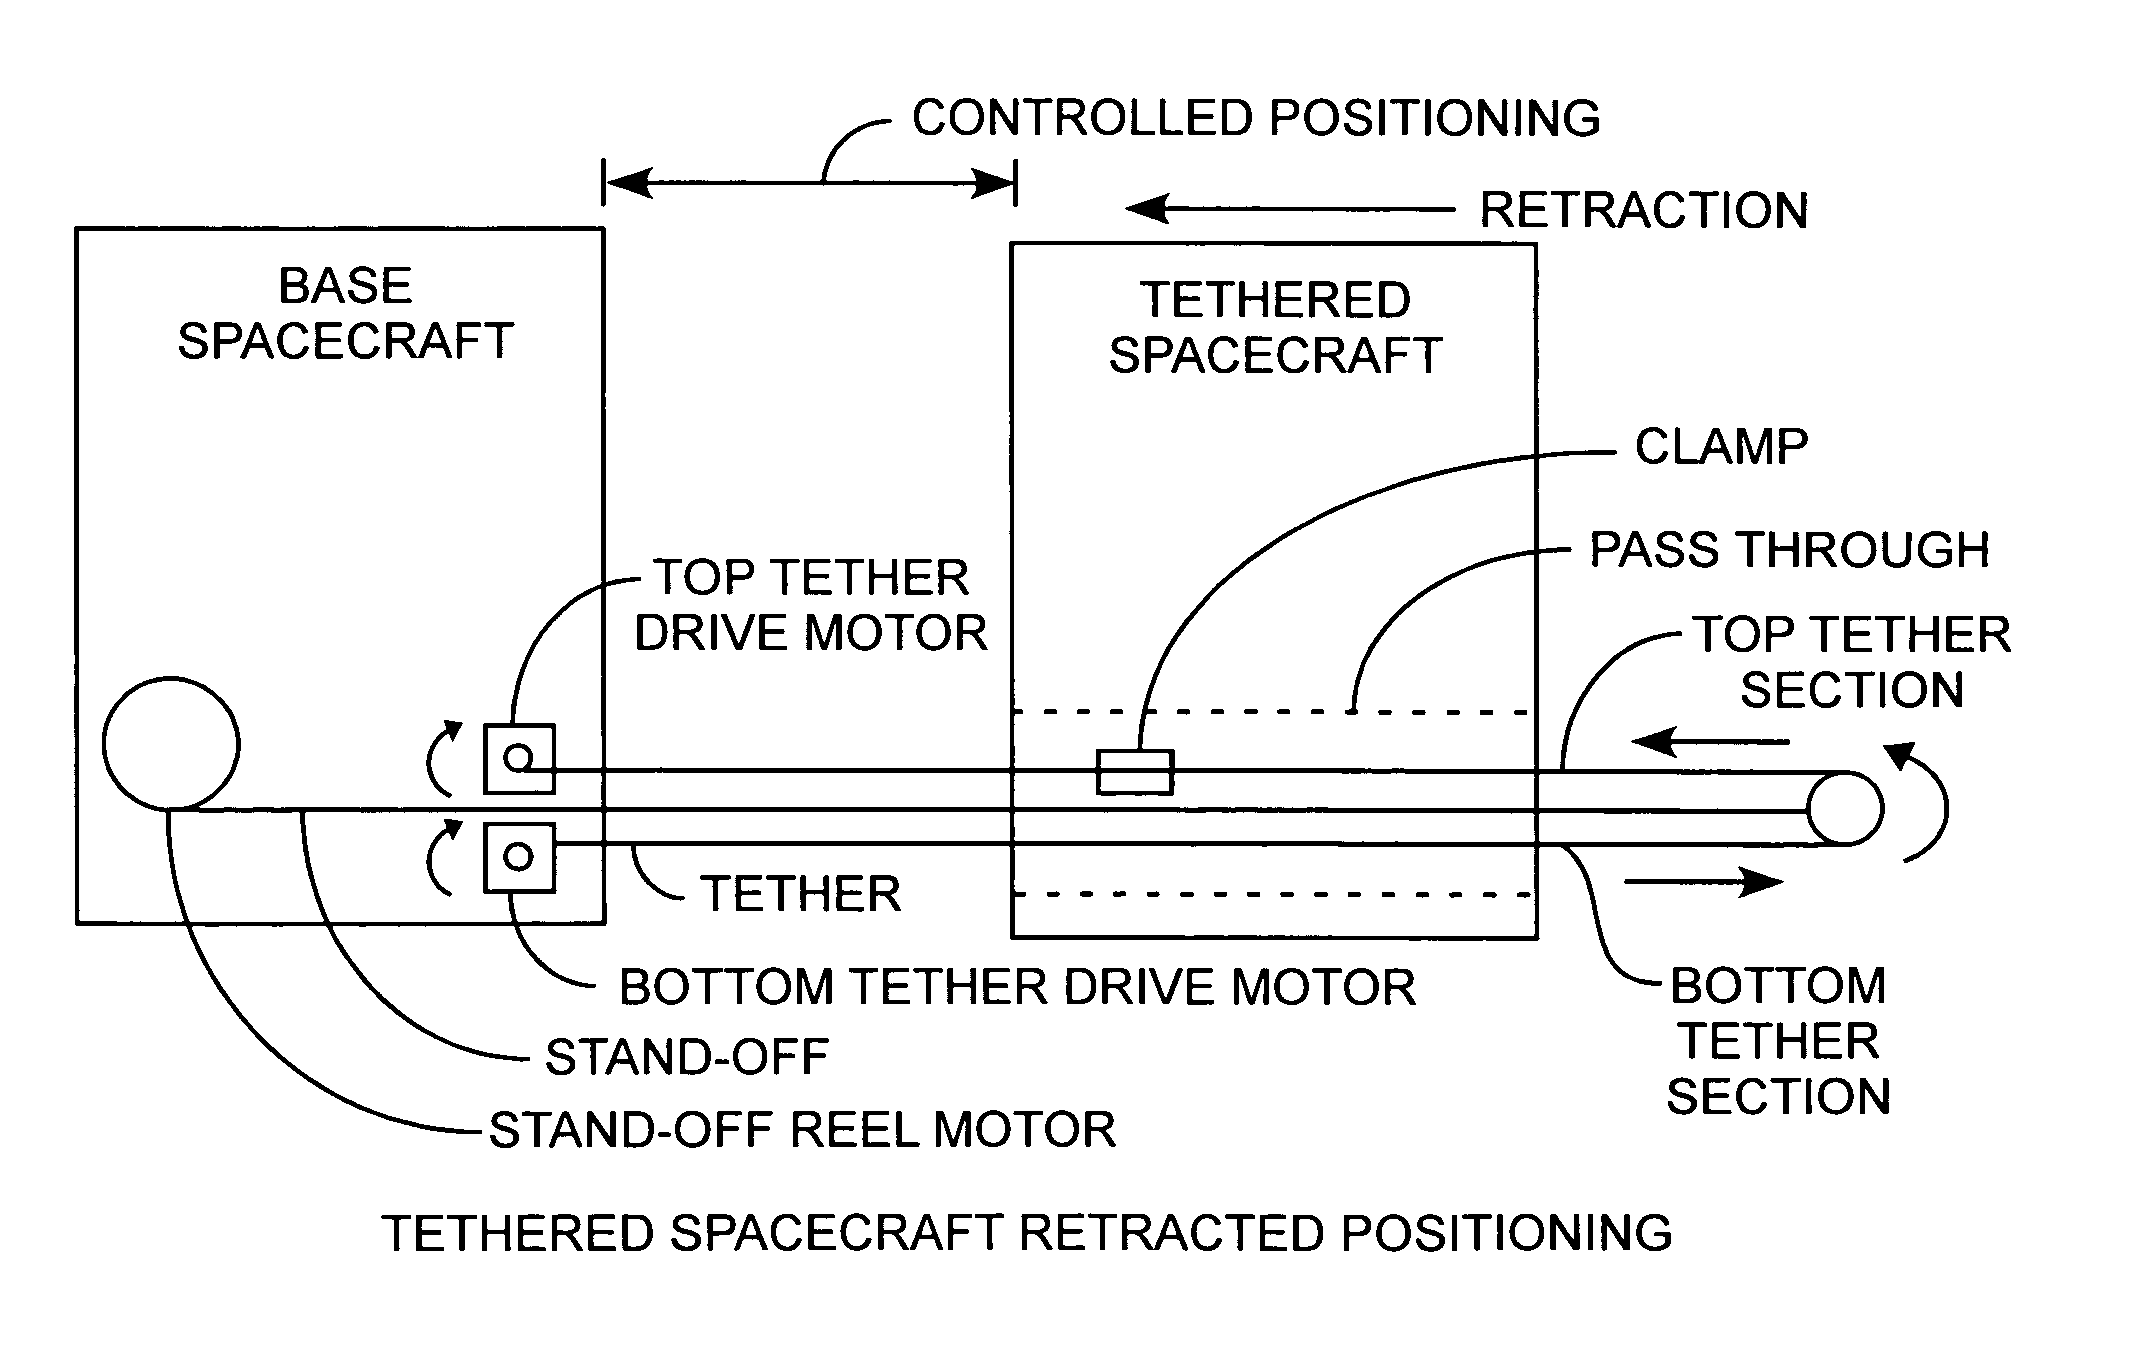 Satellite stand-off tether system